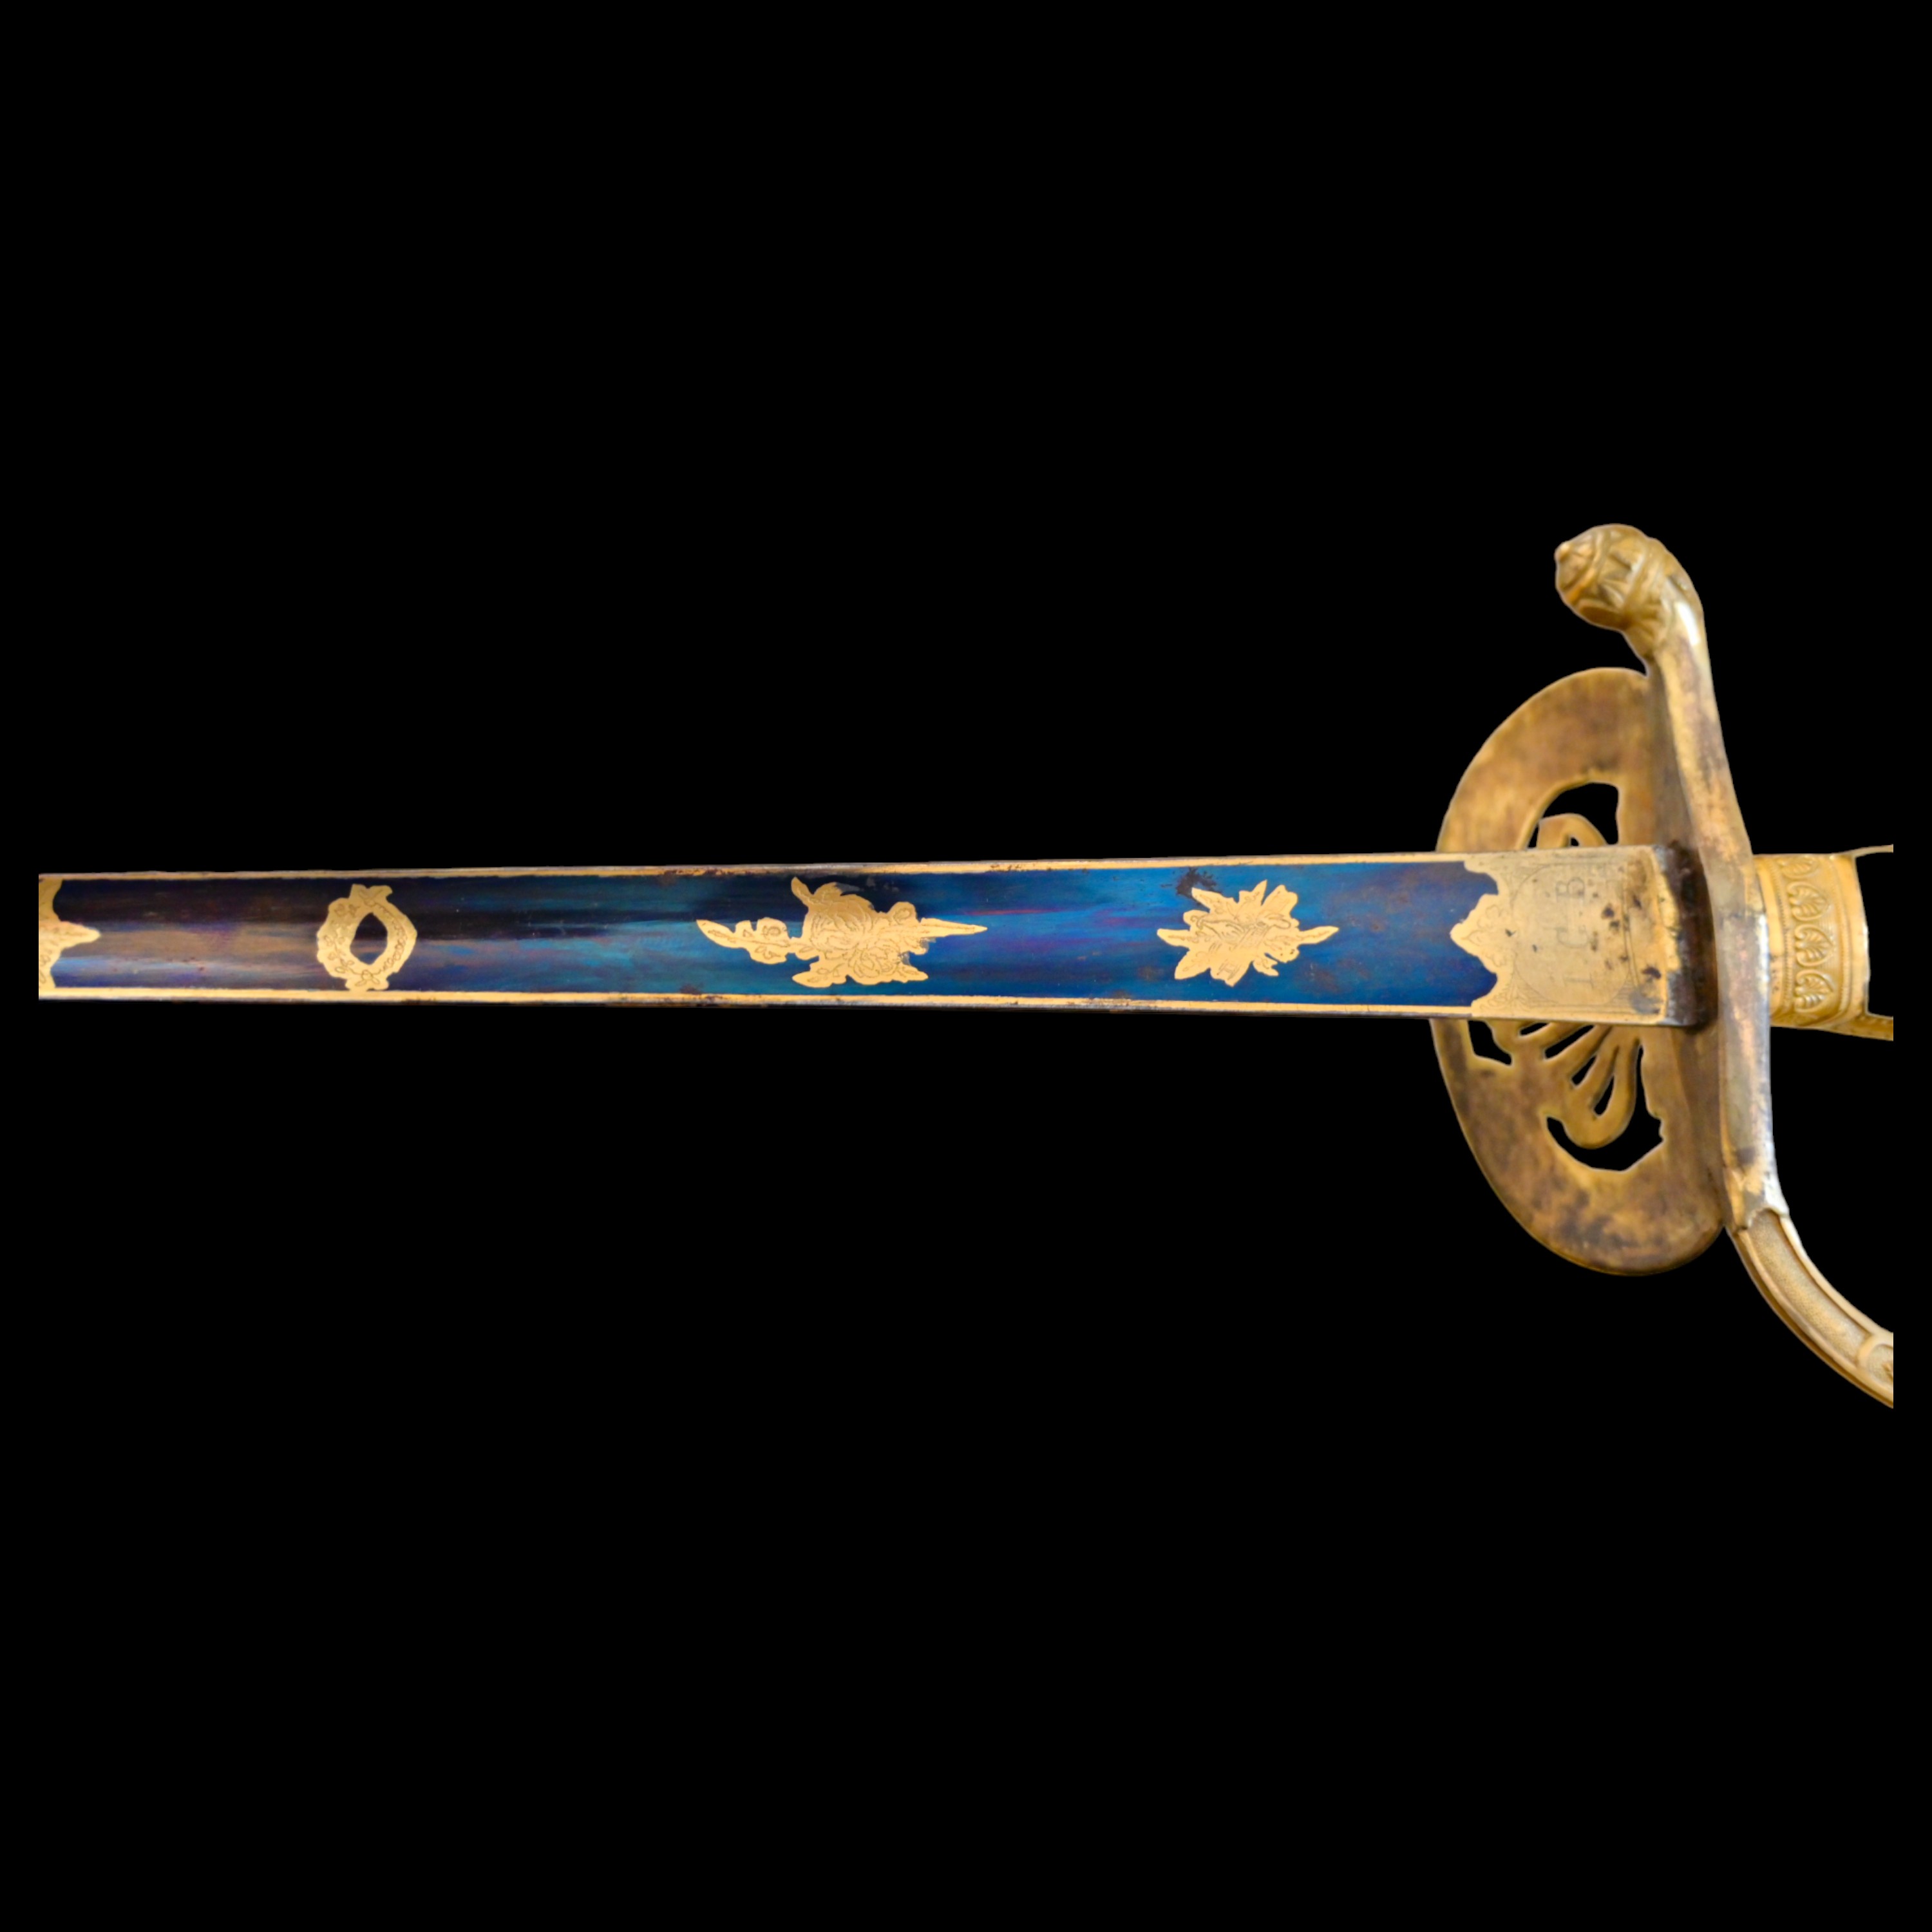 Extremely rare, First Empire, late 18th C smallsword for the founders of the "Institute of Egypt". - Image 10 of 11